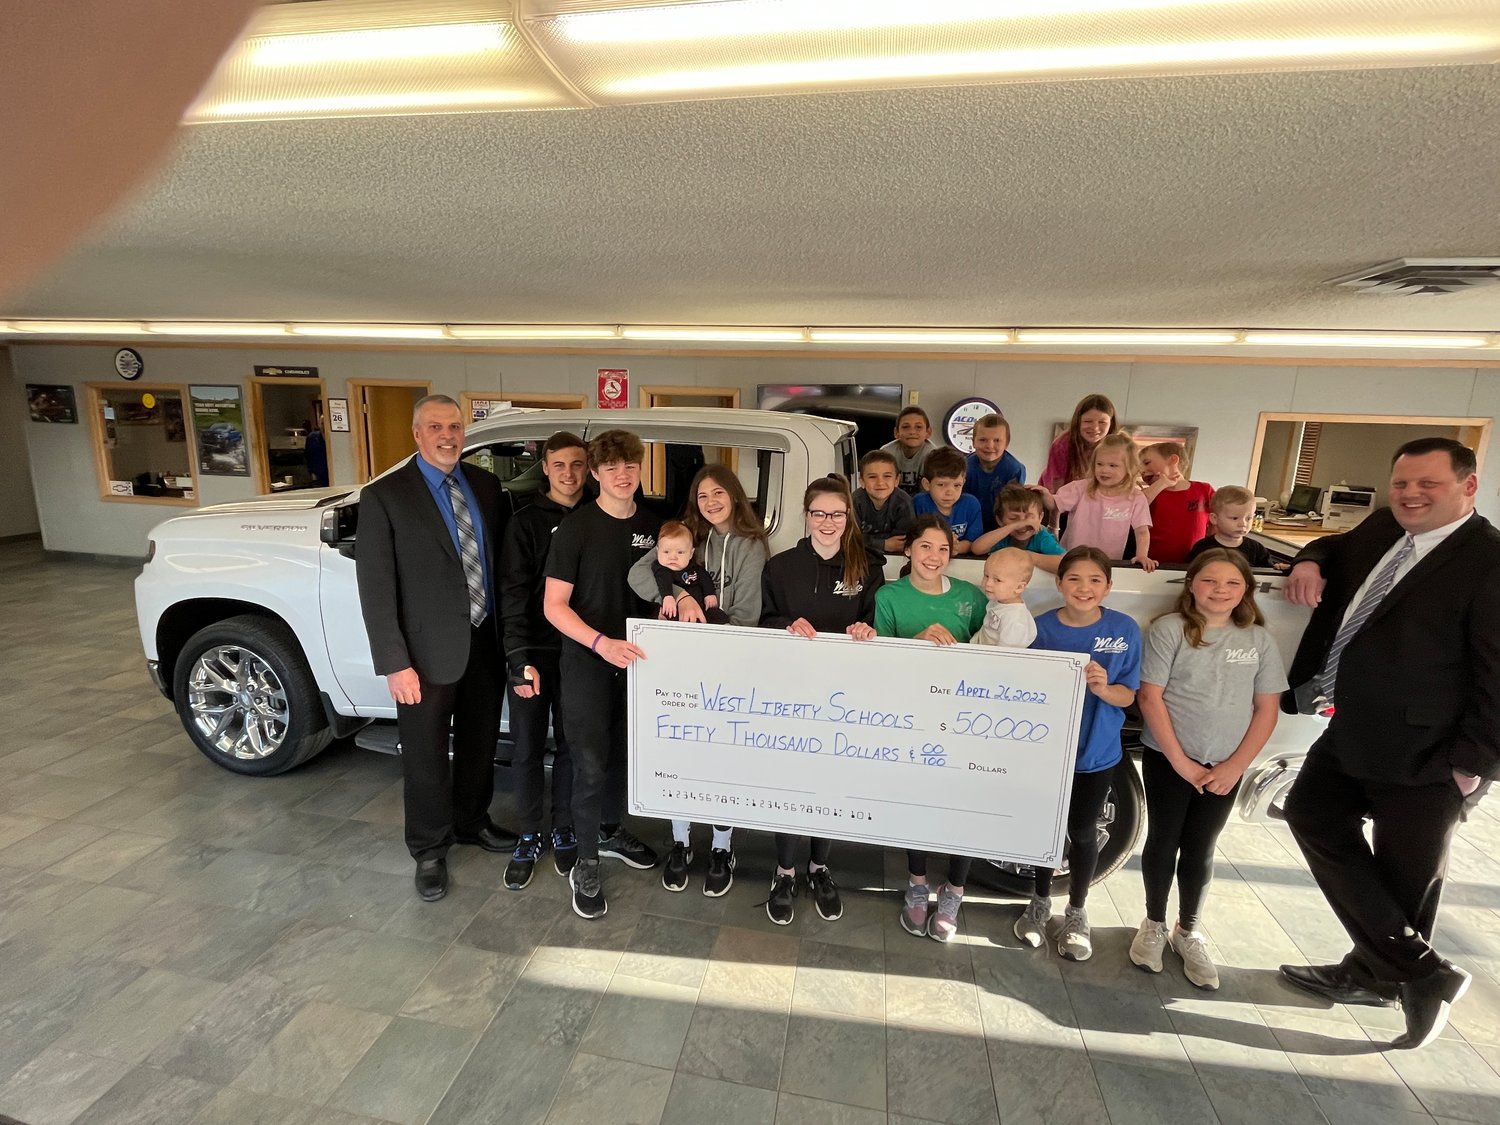 West Liberty School Superintendent Shaun Kruger, on left, and Activities Director Adam Loria join the children and grandchildren of the Wiele families that have owned the Wiele Chevrolet dealership in West Liberty for more than seven decades. The dealership presented a $50,000 check toward construction of the new athletic complex and fields to be built at West Liberty High School.